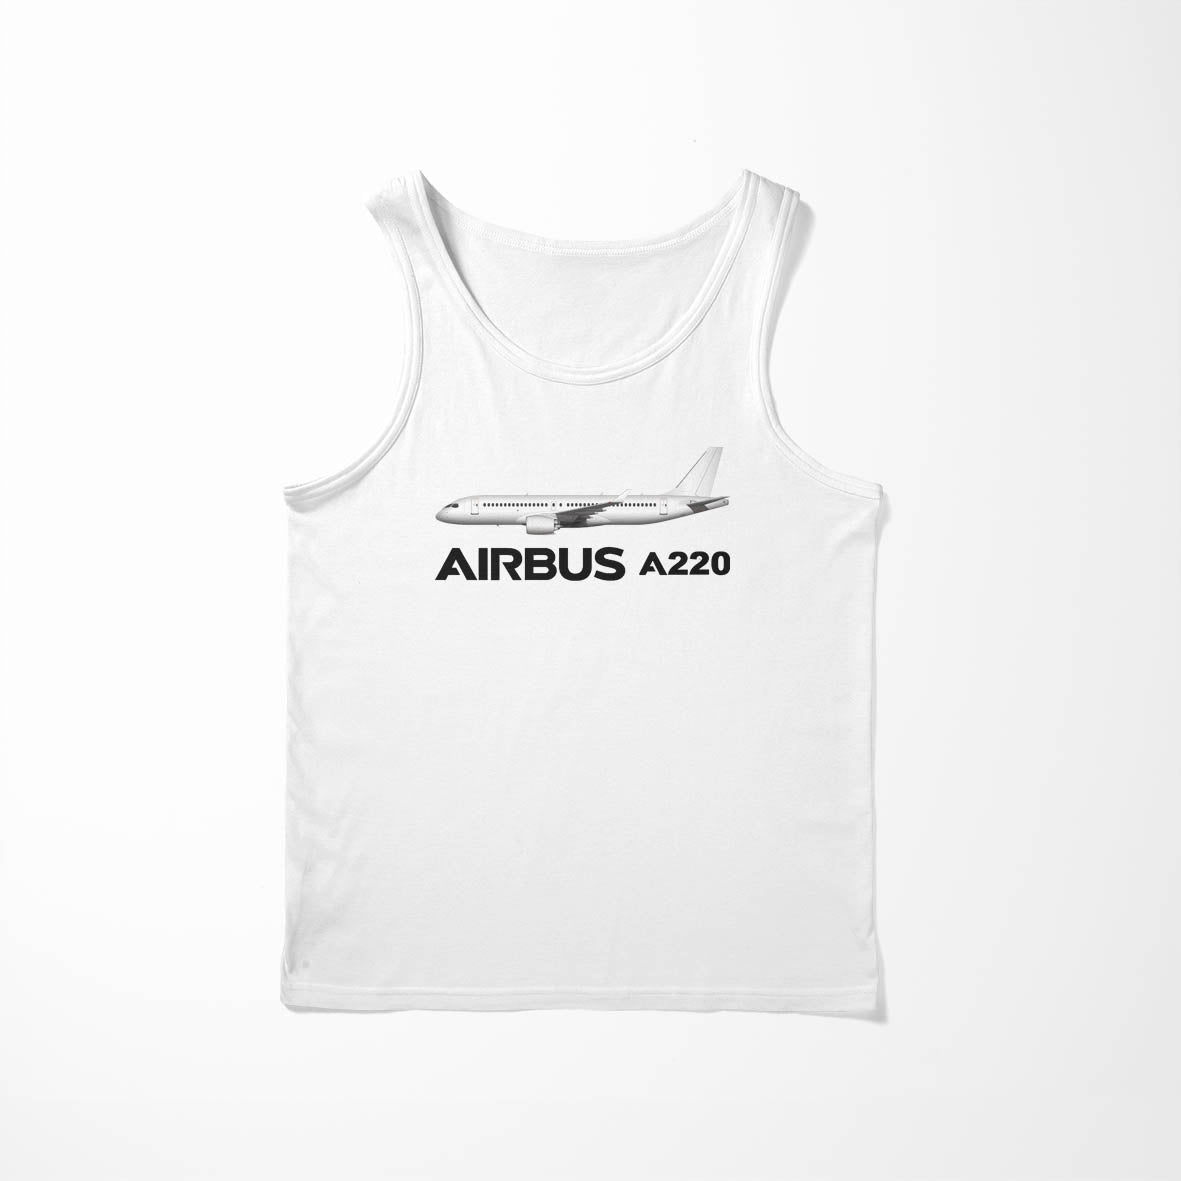 The Airbus A220 Designed Tank Tops